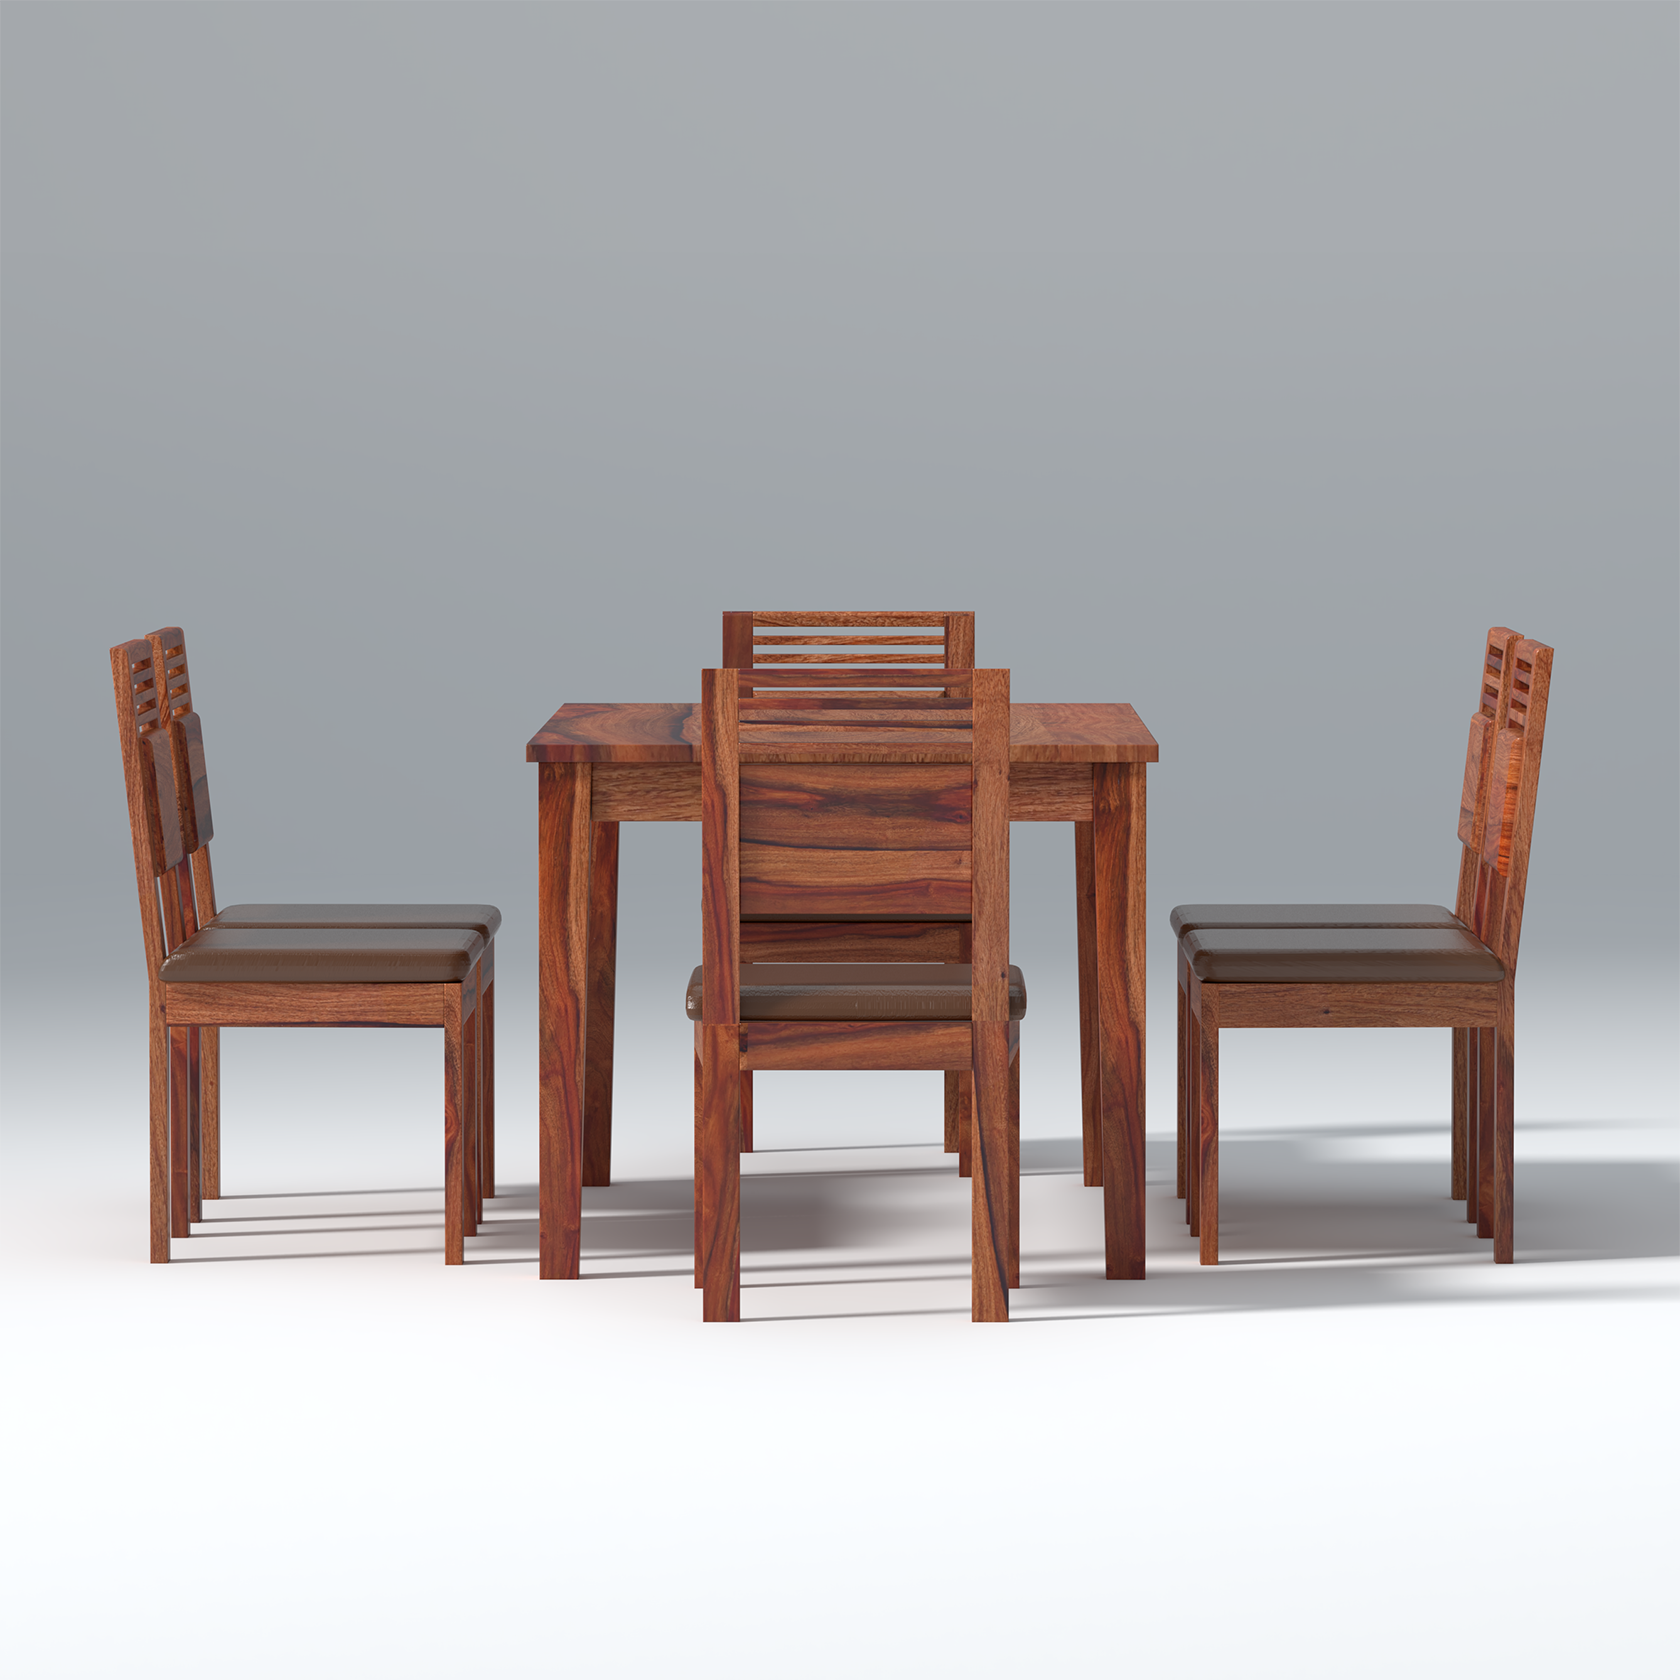 Velour Sheesham wood dining set in Reddish walnut Color with 6 Seating